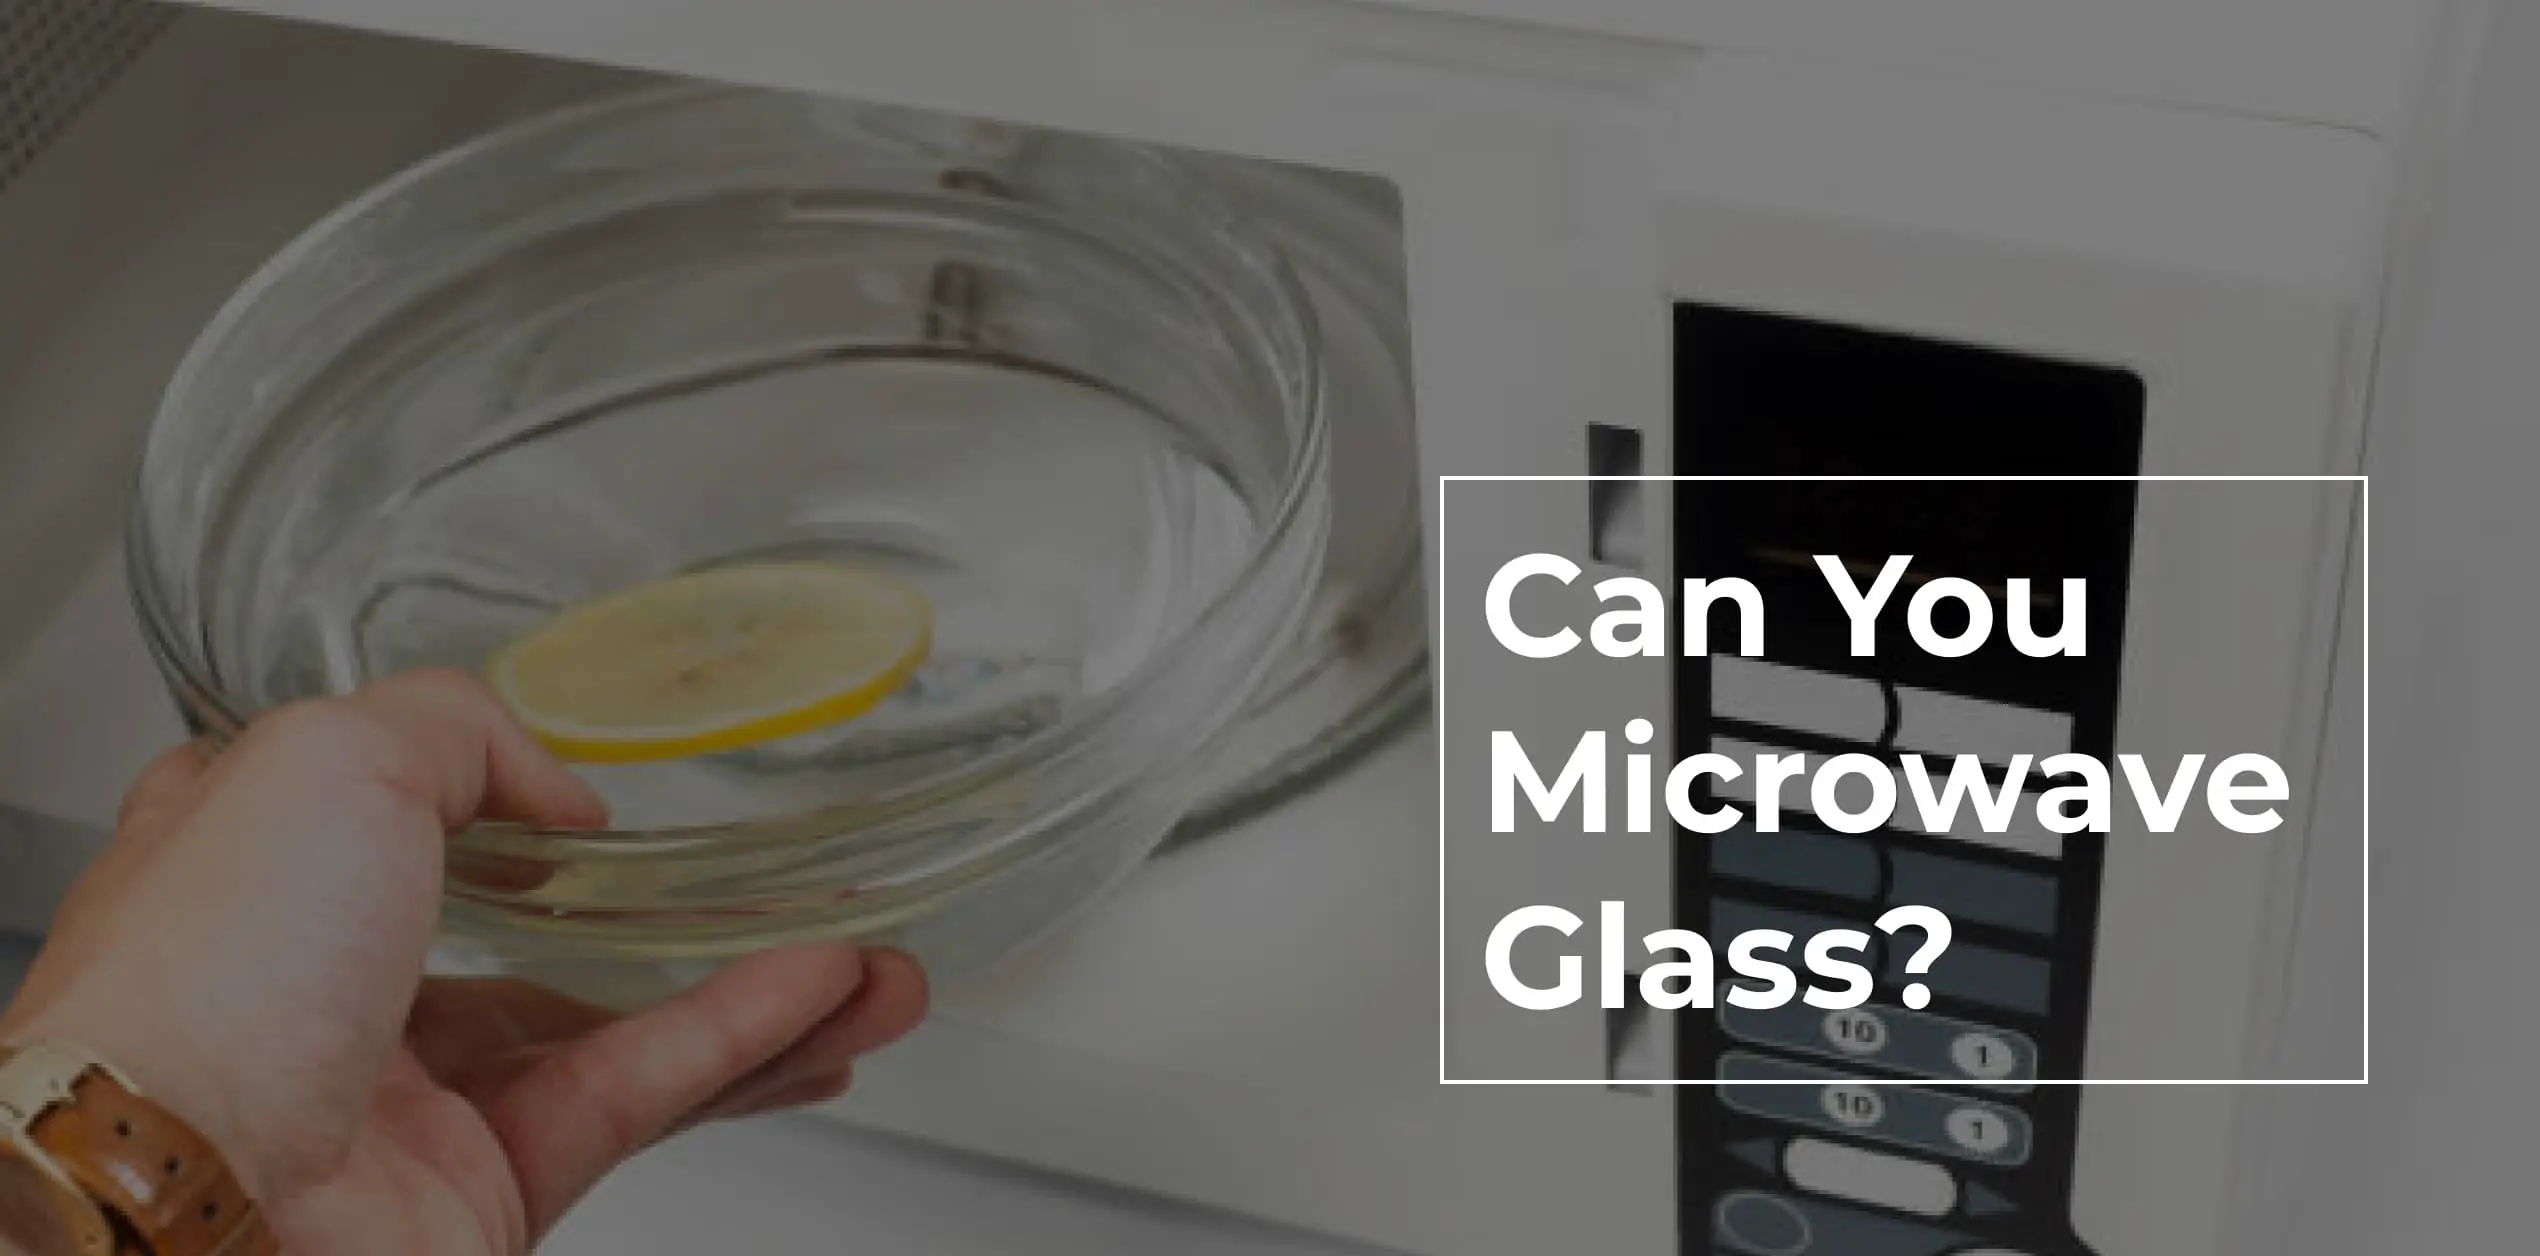 Can You Microwave Glass